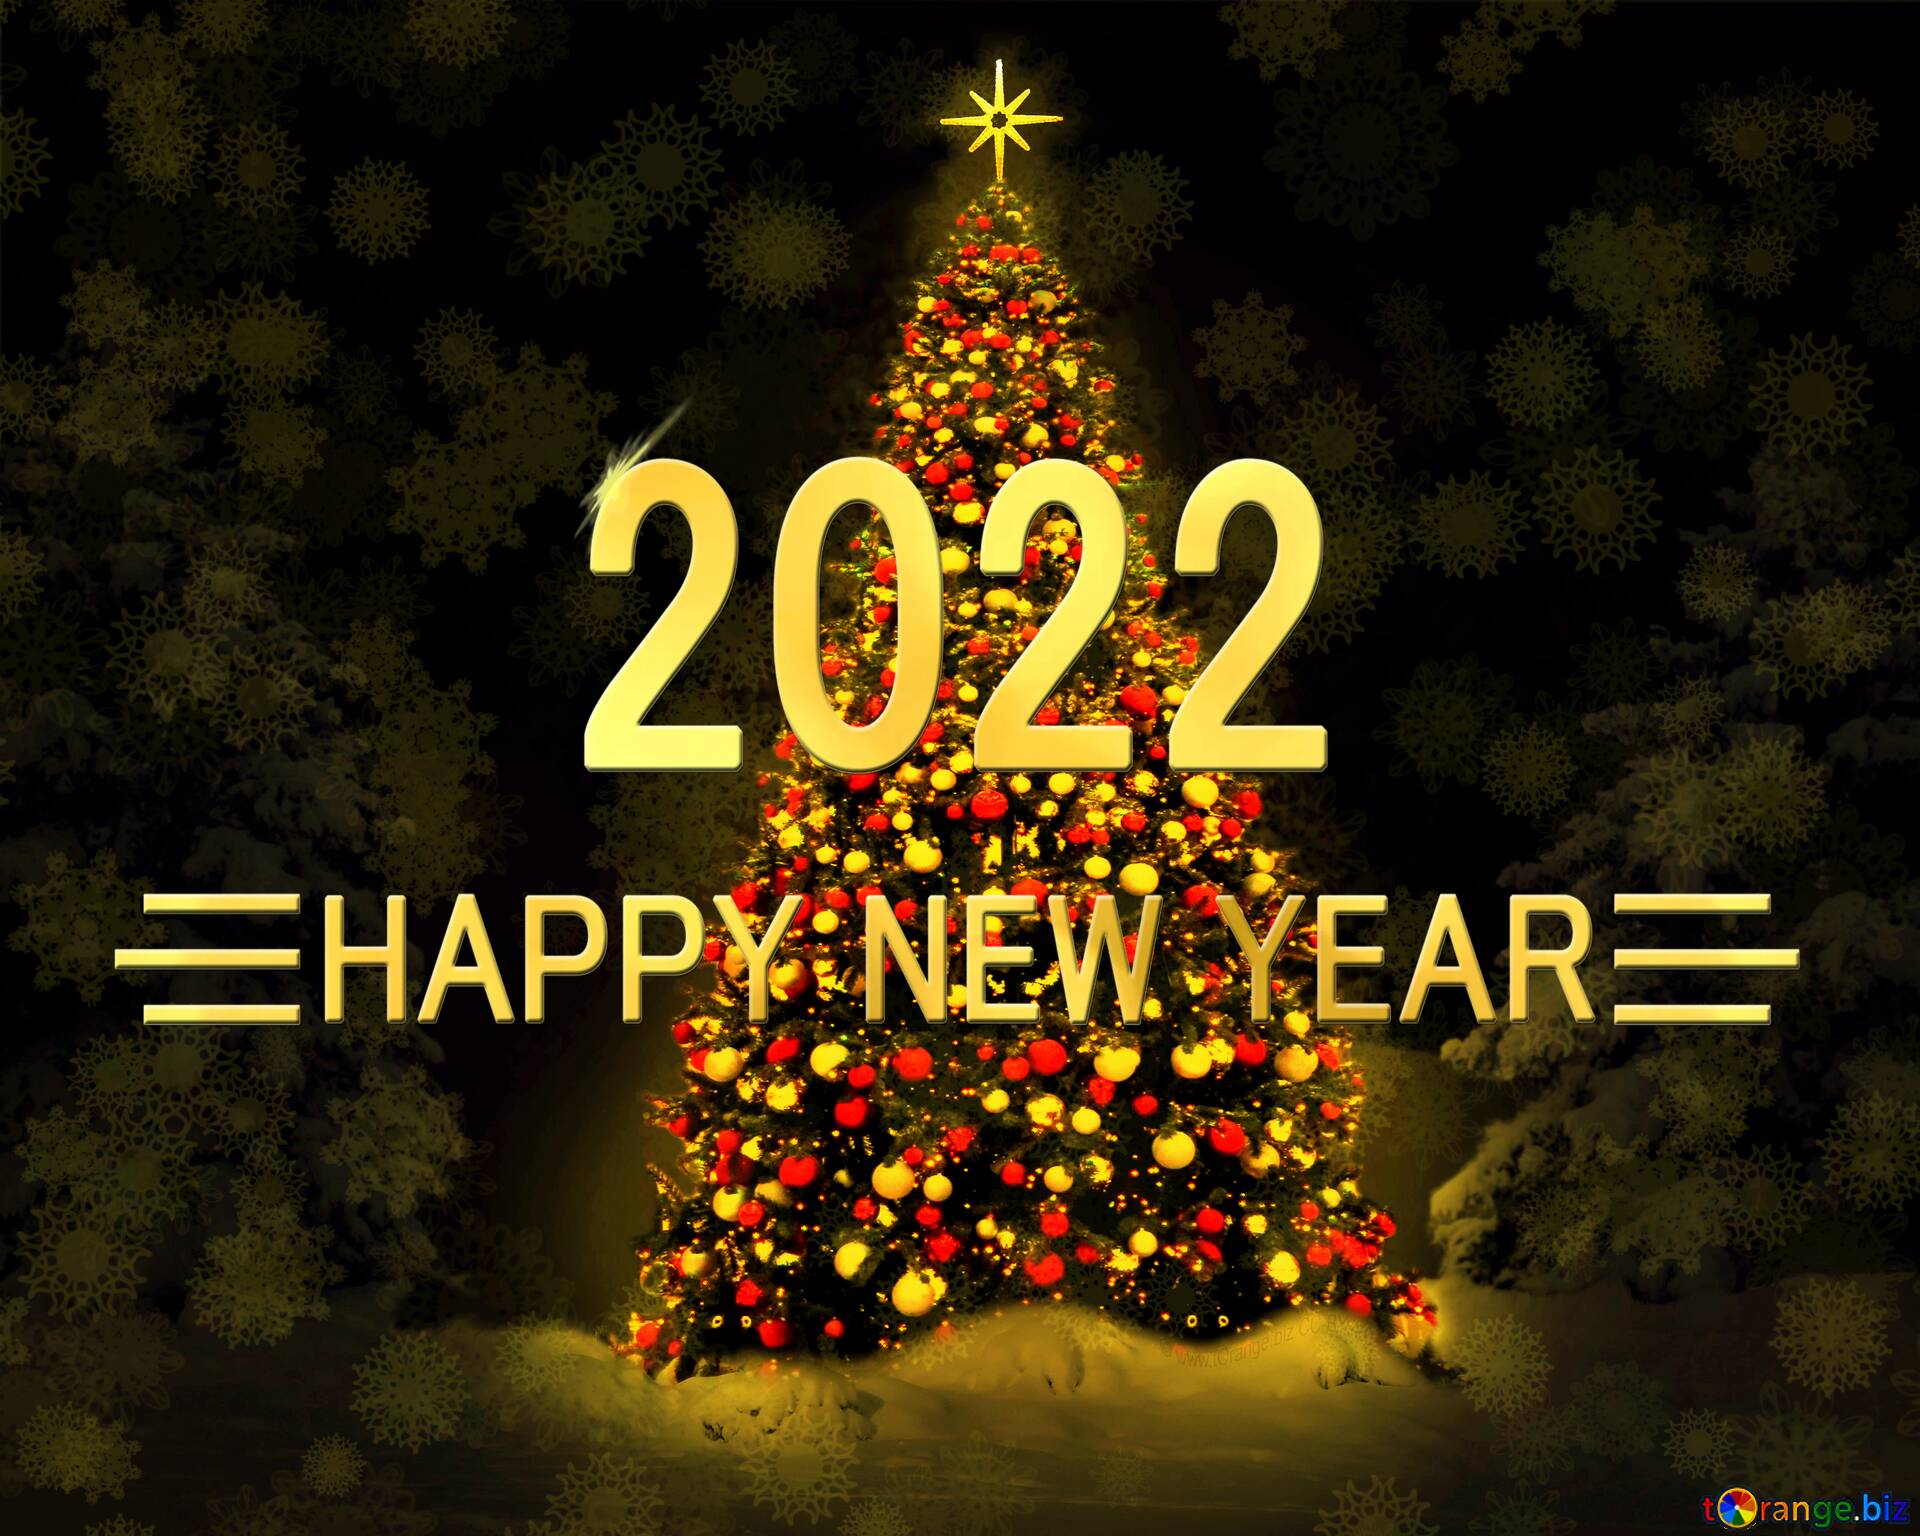 Download Free Picture Christmas Tree Shiny Happy New Year 2022 Background On CC BY License Free Image Stock TOrange.biz Fx №141075